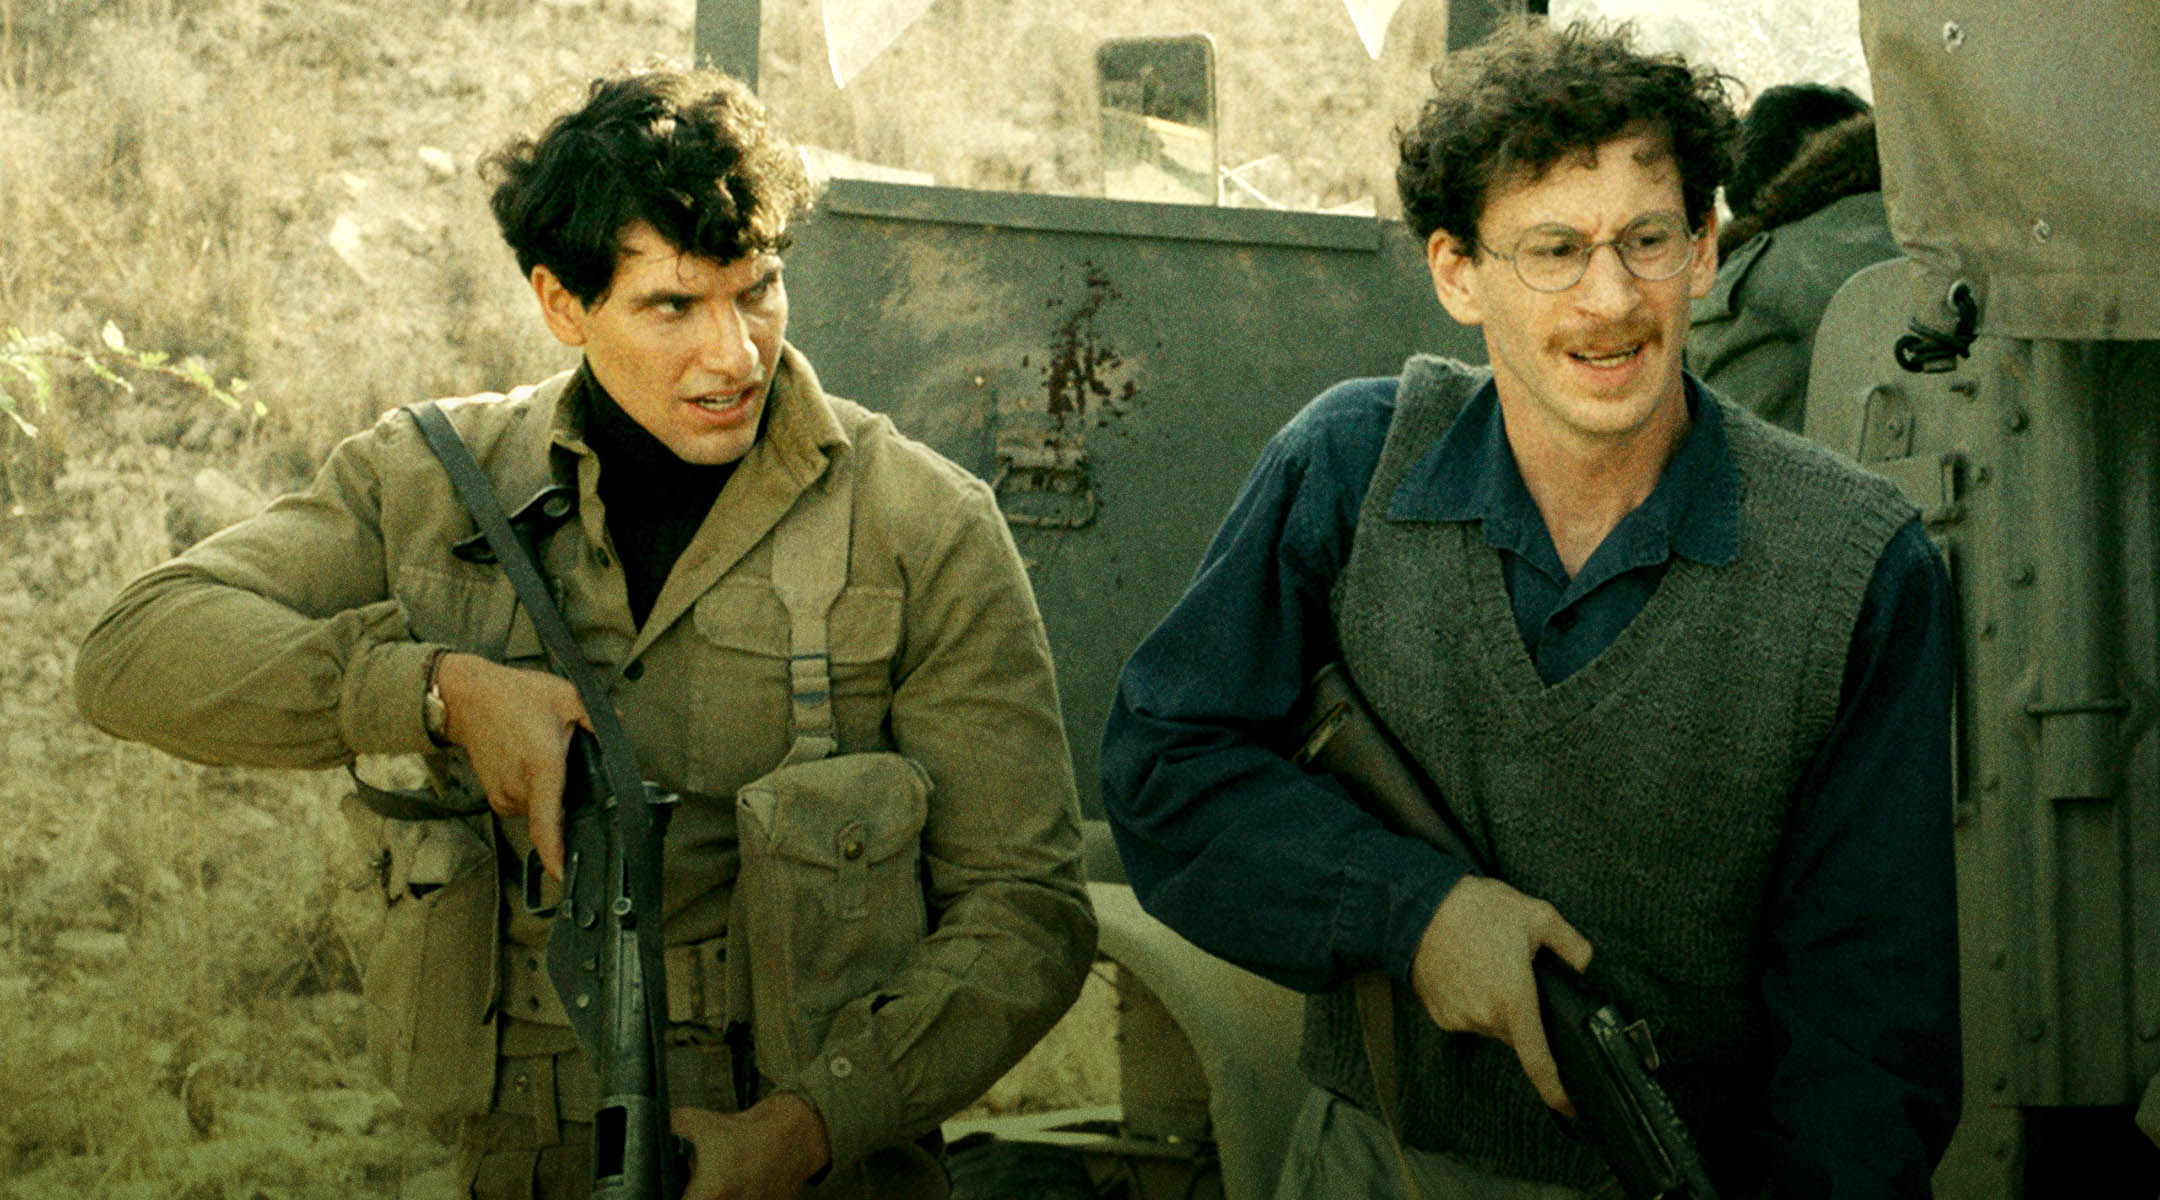 Actors playing Israeli soldiers